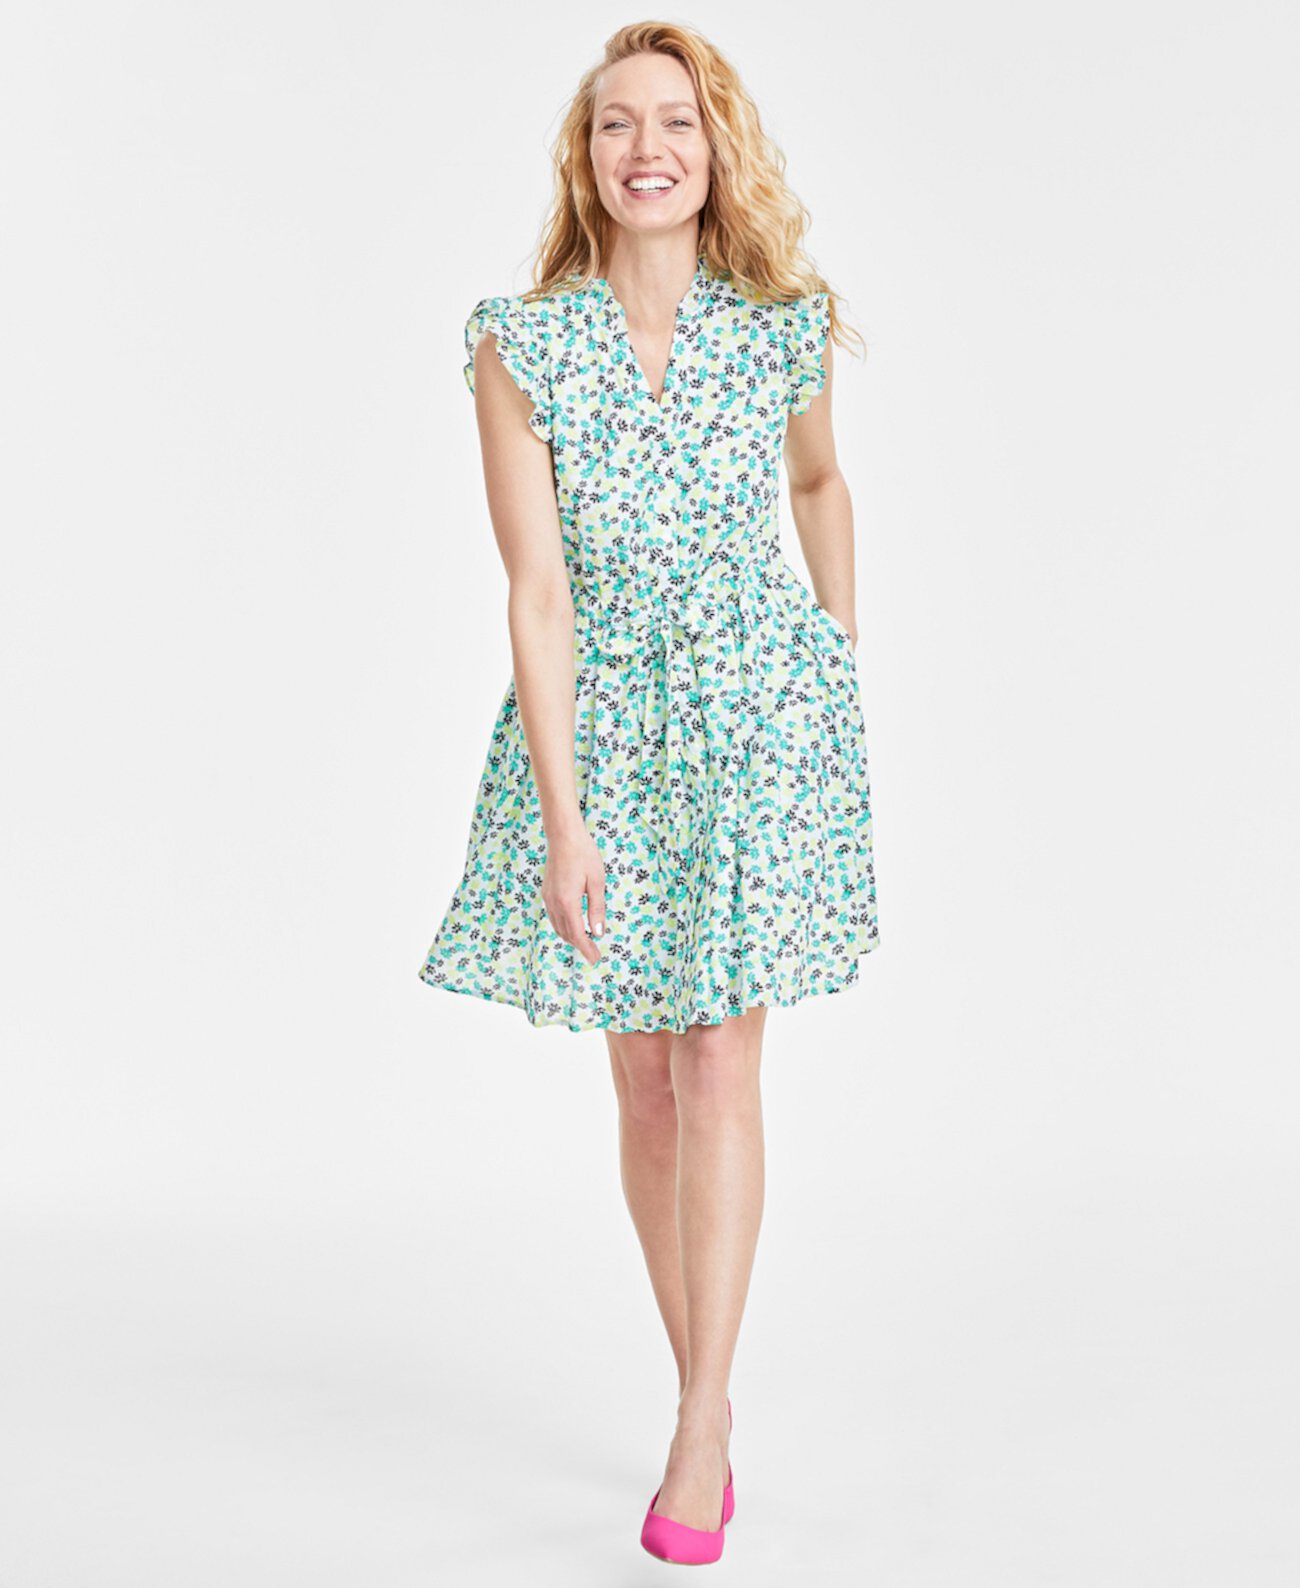 Women's Printed Ruffled Dress, Created for Macy's On 34th